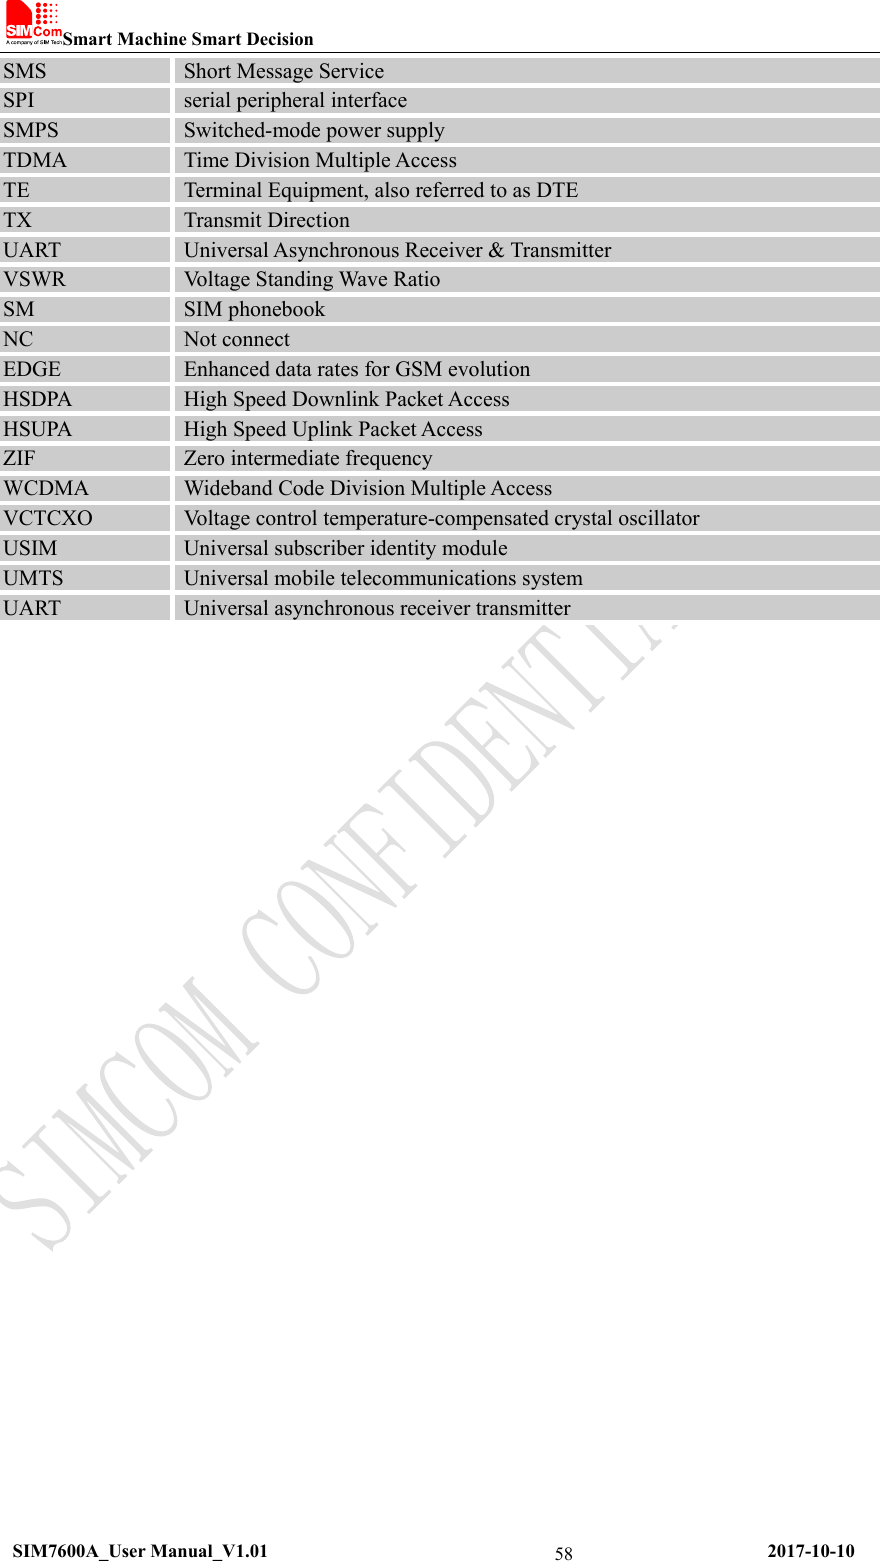 Smart Machine Smart Decision  SIM7600A_User Manual_V1.01                                                     2017-10-10 58SMS  Short Message Service SPI  serial peripheral interface SMPS  Switched-mode power supply TDMA  Time Division Multiple Access TE  Terminal Equipment, also referred to as DTE TX  Transmit Direction UART  Universal Asynchronous Receiver &amp; Transmitter VSWR  Voltage Standing Wave Ratio SM  SIM phonebook NC  Not connect EDGE  Enhanced data rates for GSM evolution HSDPA  High Speed Downlink Packet Access HSUPA  High Speed Uplink Packet Access ZIF  Zero intermediate frequency WCDMA  Wideband Code Division Multiple Access VCTCXO  Voltage control temperature-compensated crystal oscillator USIM  Universal subscriber identity module UMTS  Universal mobile telecommunications system UART  Universal asynchronous receiver transmitter     